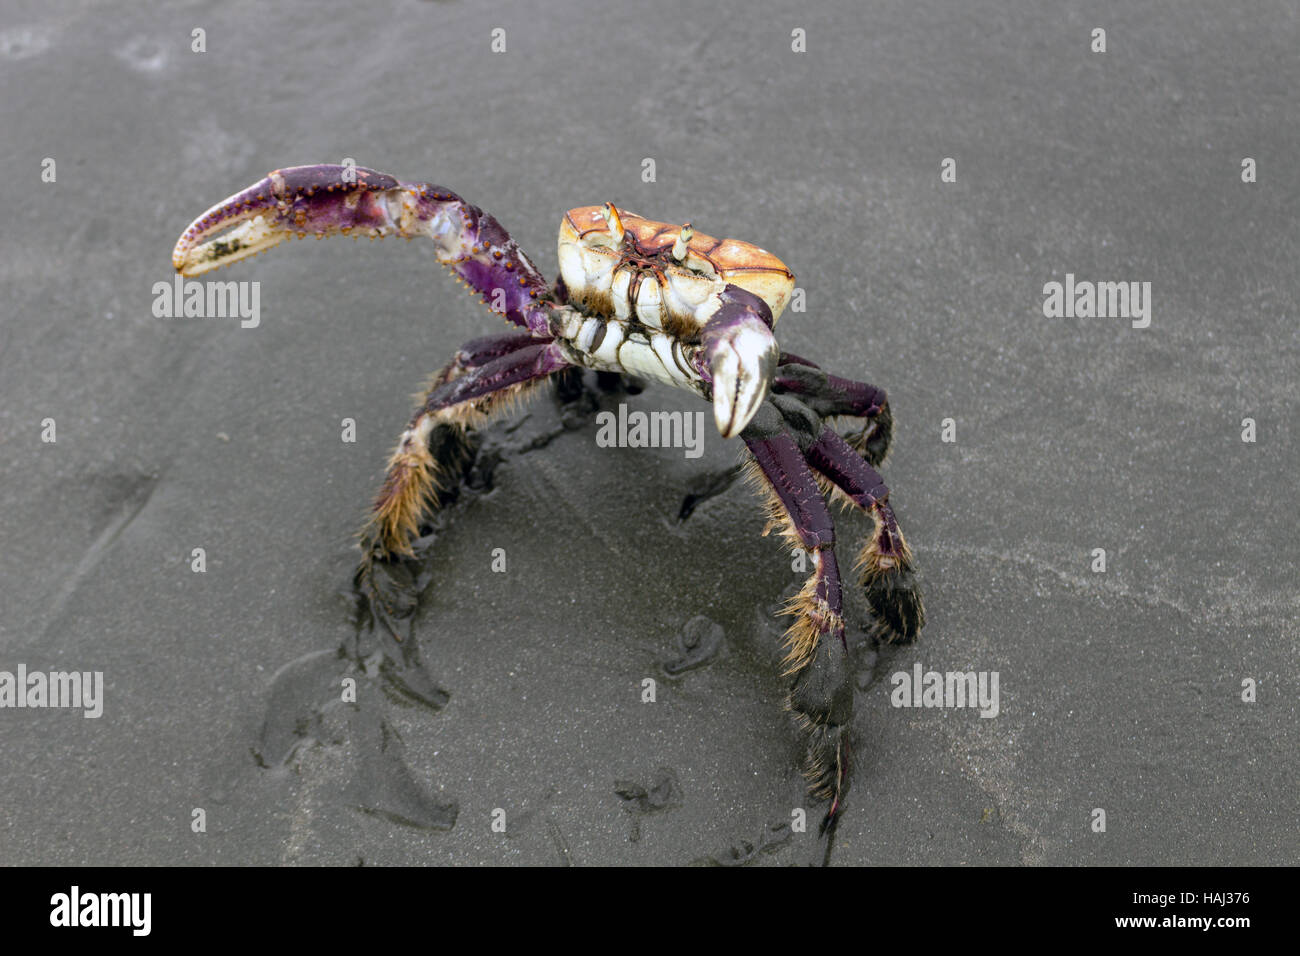 Mangrove crab (Ucides cordatus) known as 'caraguejo uçá' walking on the beach Stock Photo